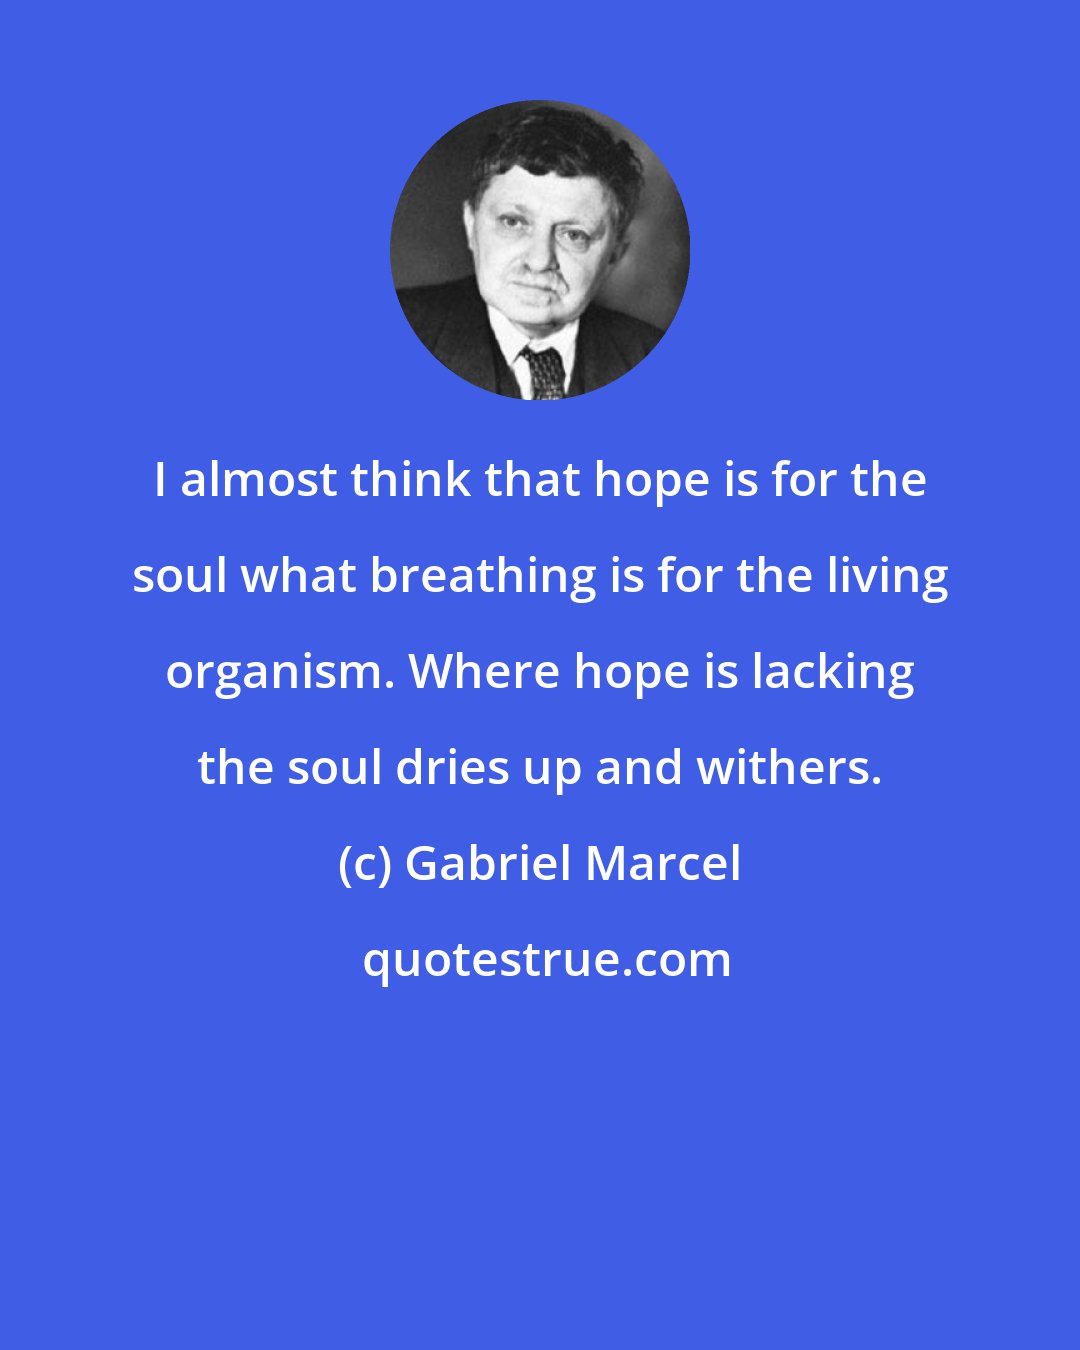 Gabriel Marcel: I almost think that hope is for the soul what breathing is for the living organism. Where hope is lacking the soul dries up and withers.